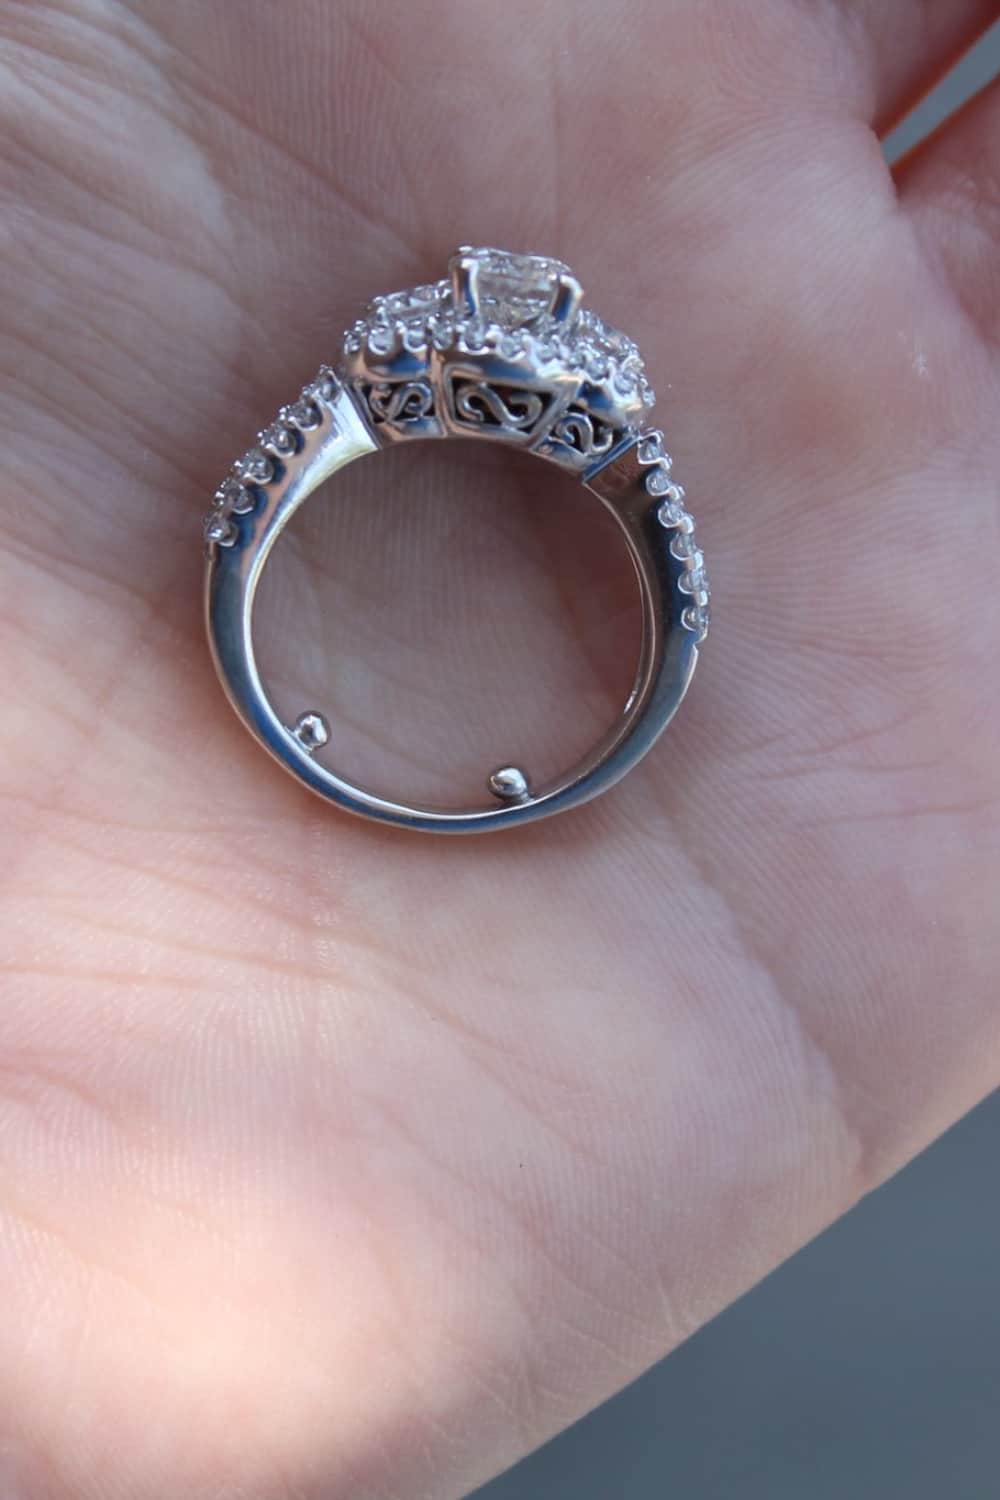 How Much To Resize Ring